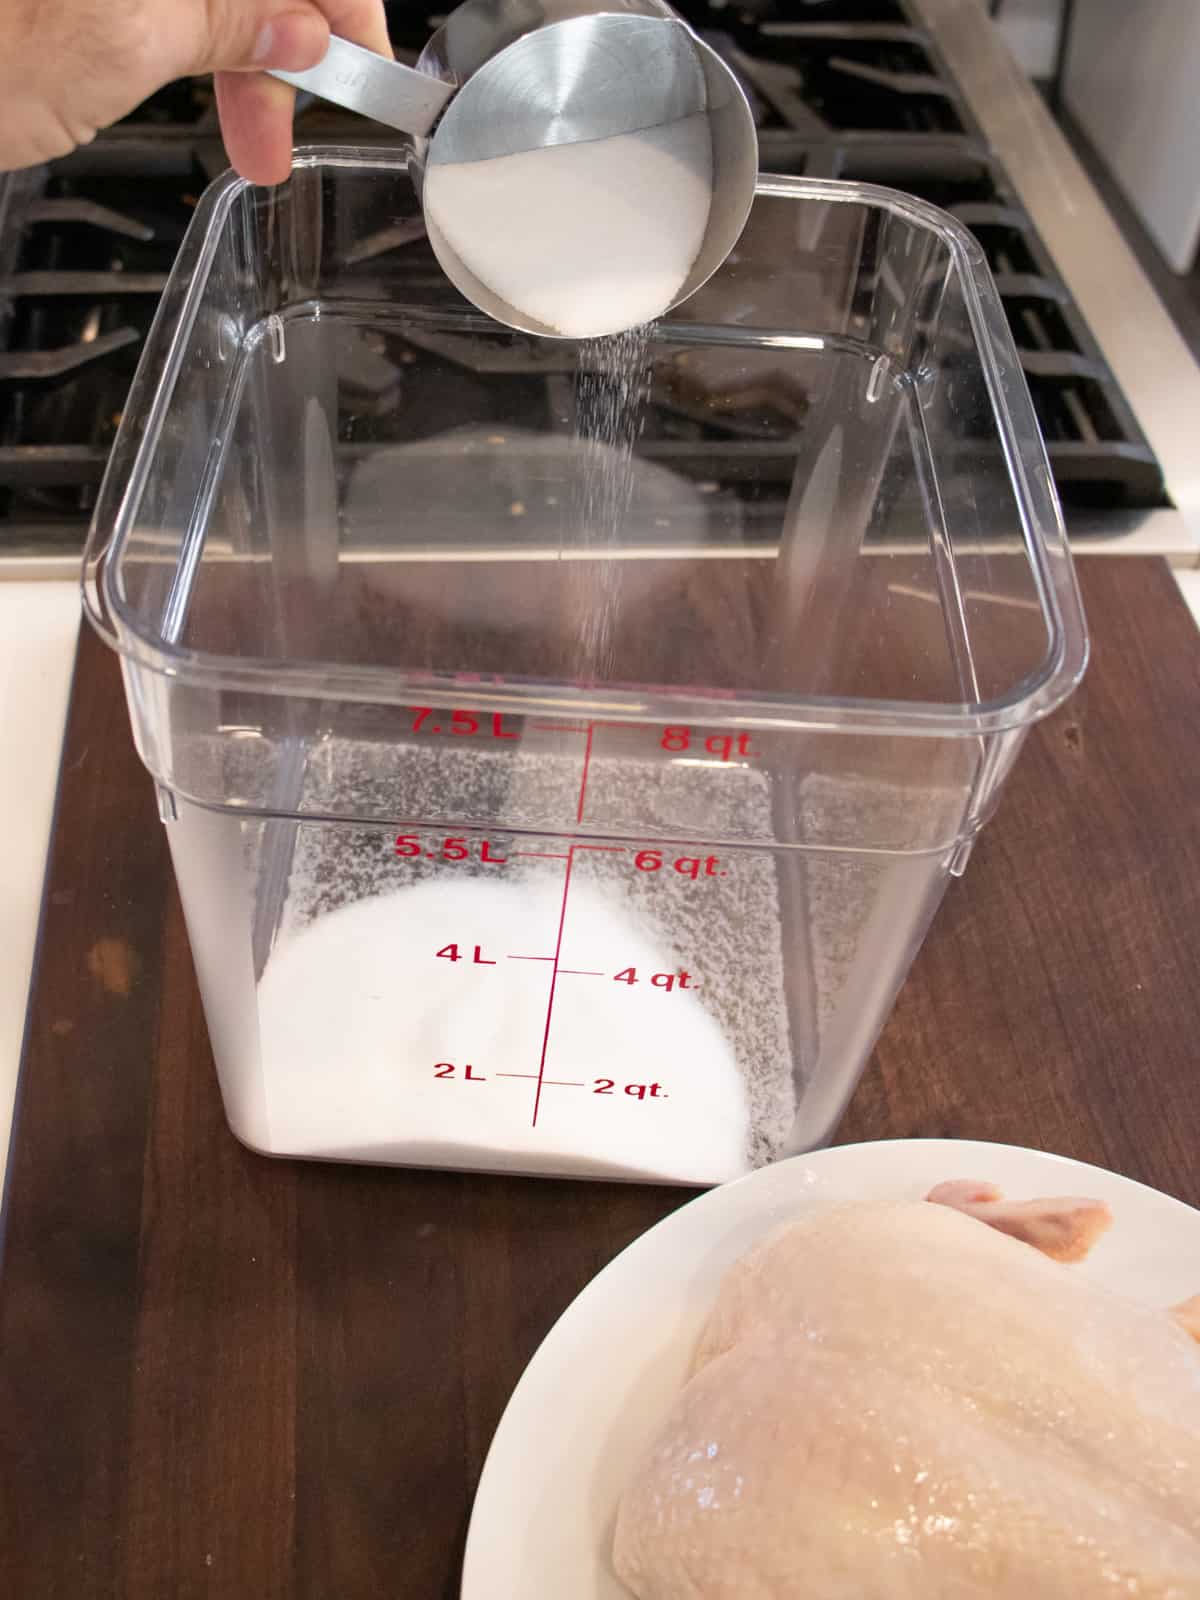 Dumping salt into a clear rectangular container.